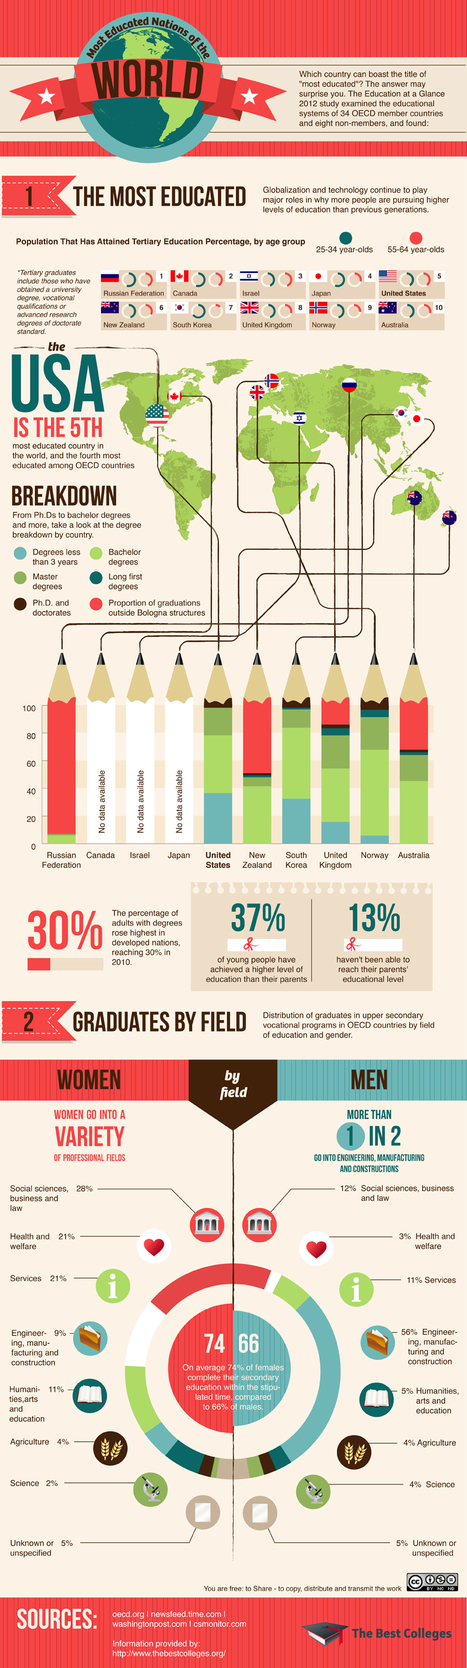 The Most Educated Nations in 2012 [Infographic] | 21st Century Learning and Teaching | Scoop.it